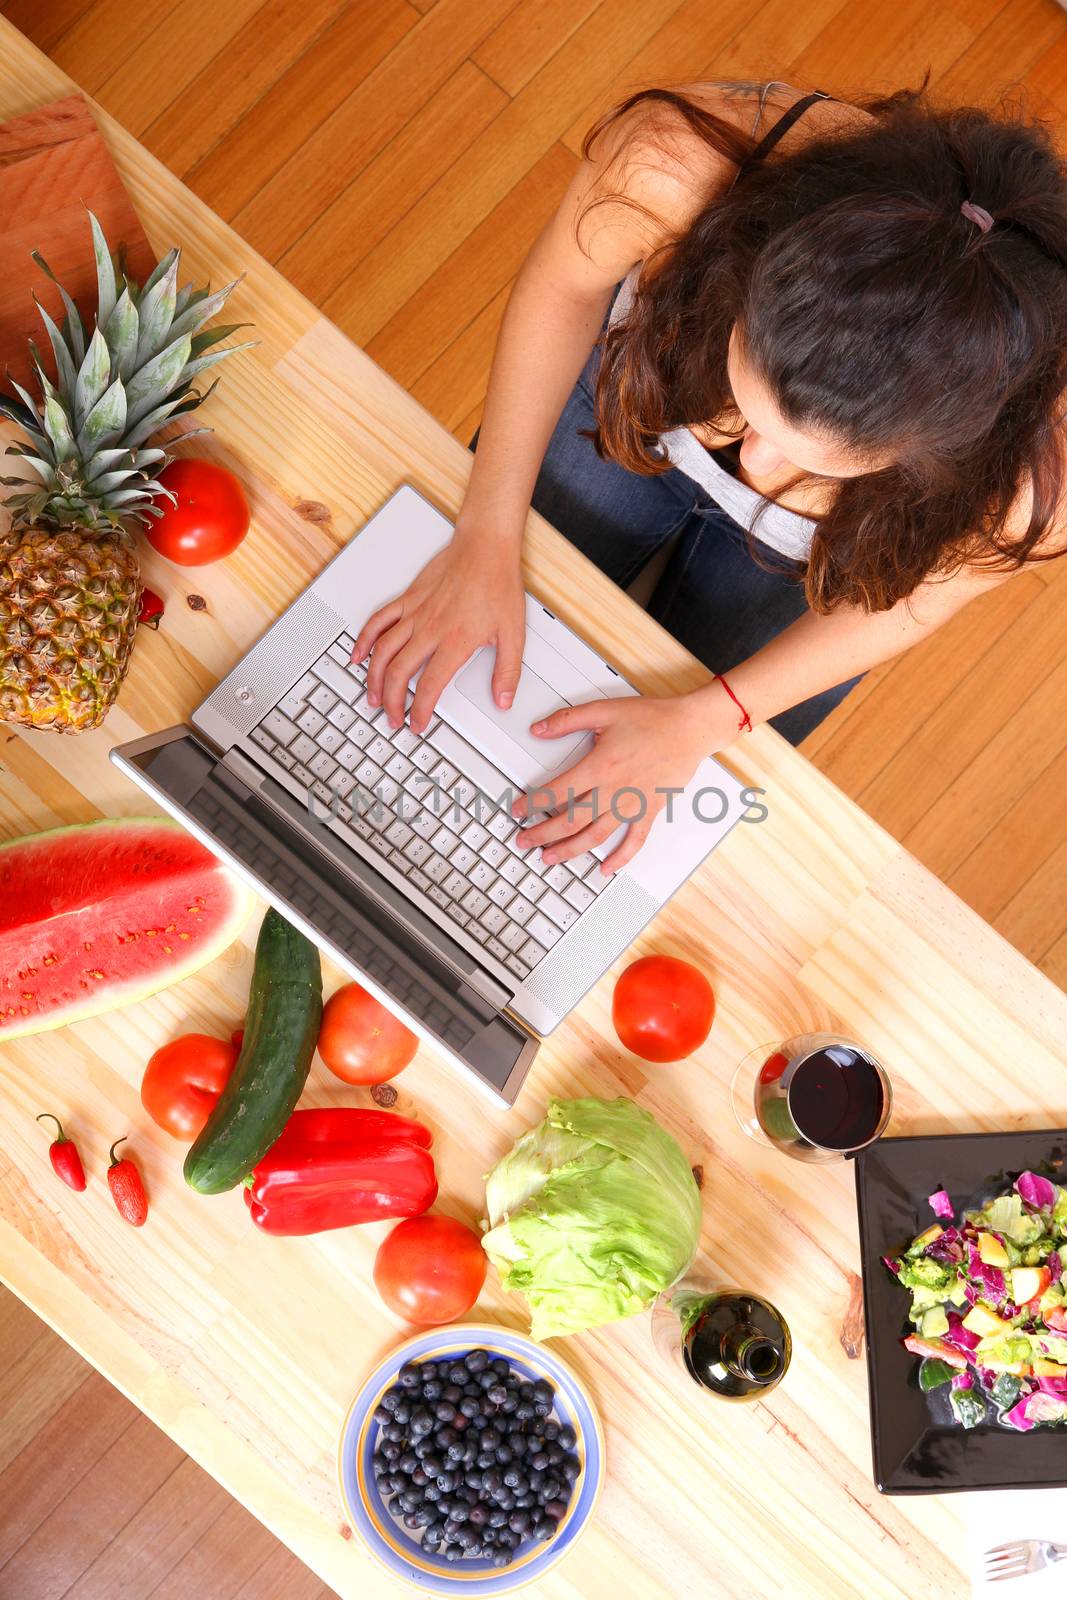 A young woman using a Laptop while cooking.